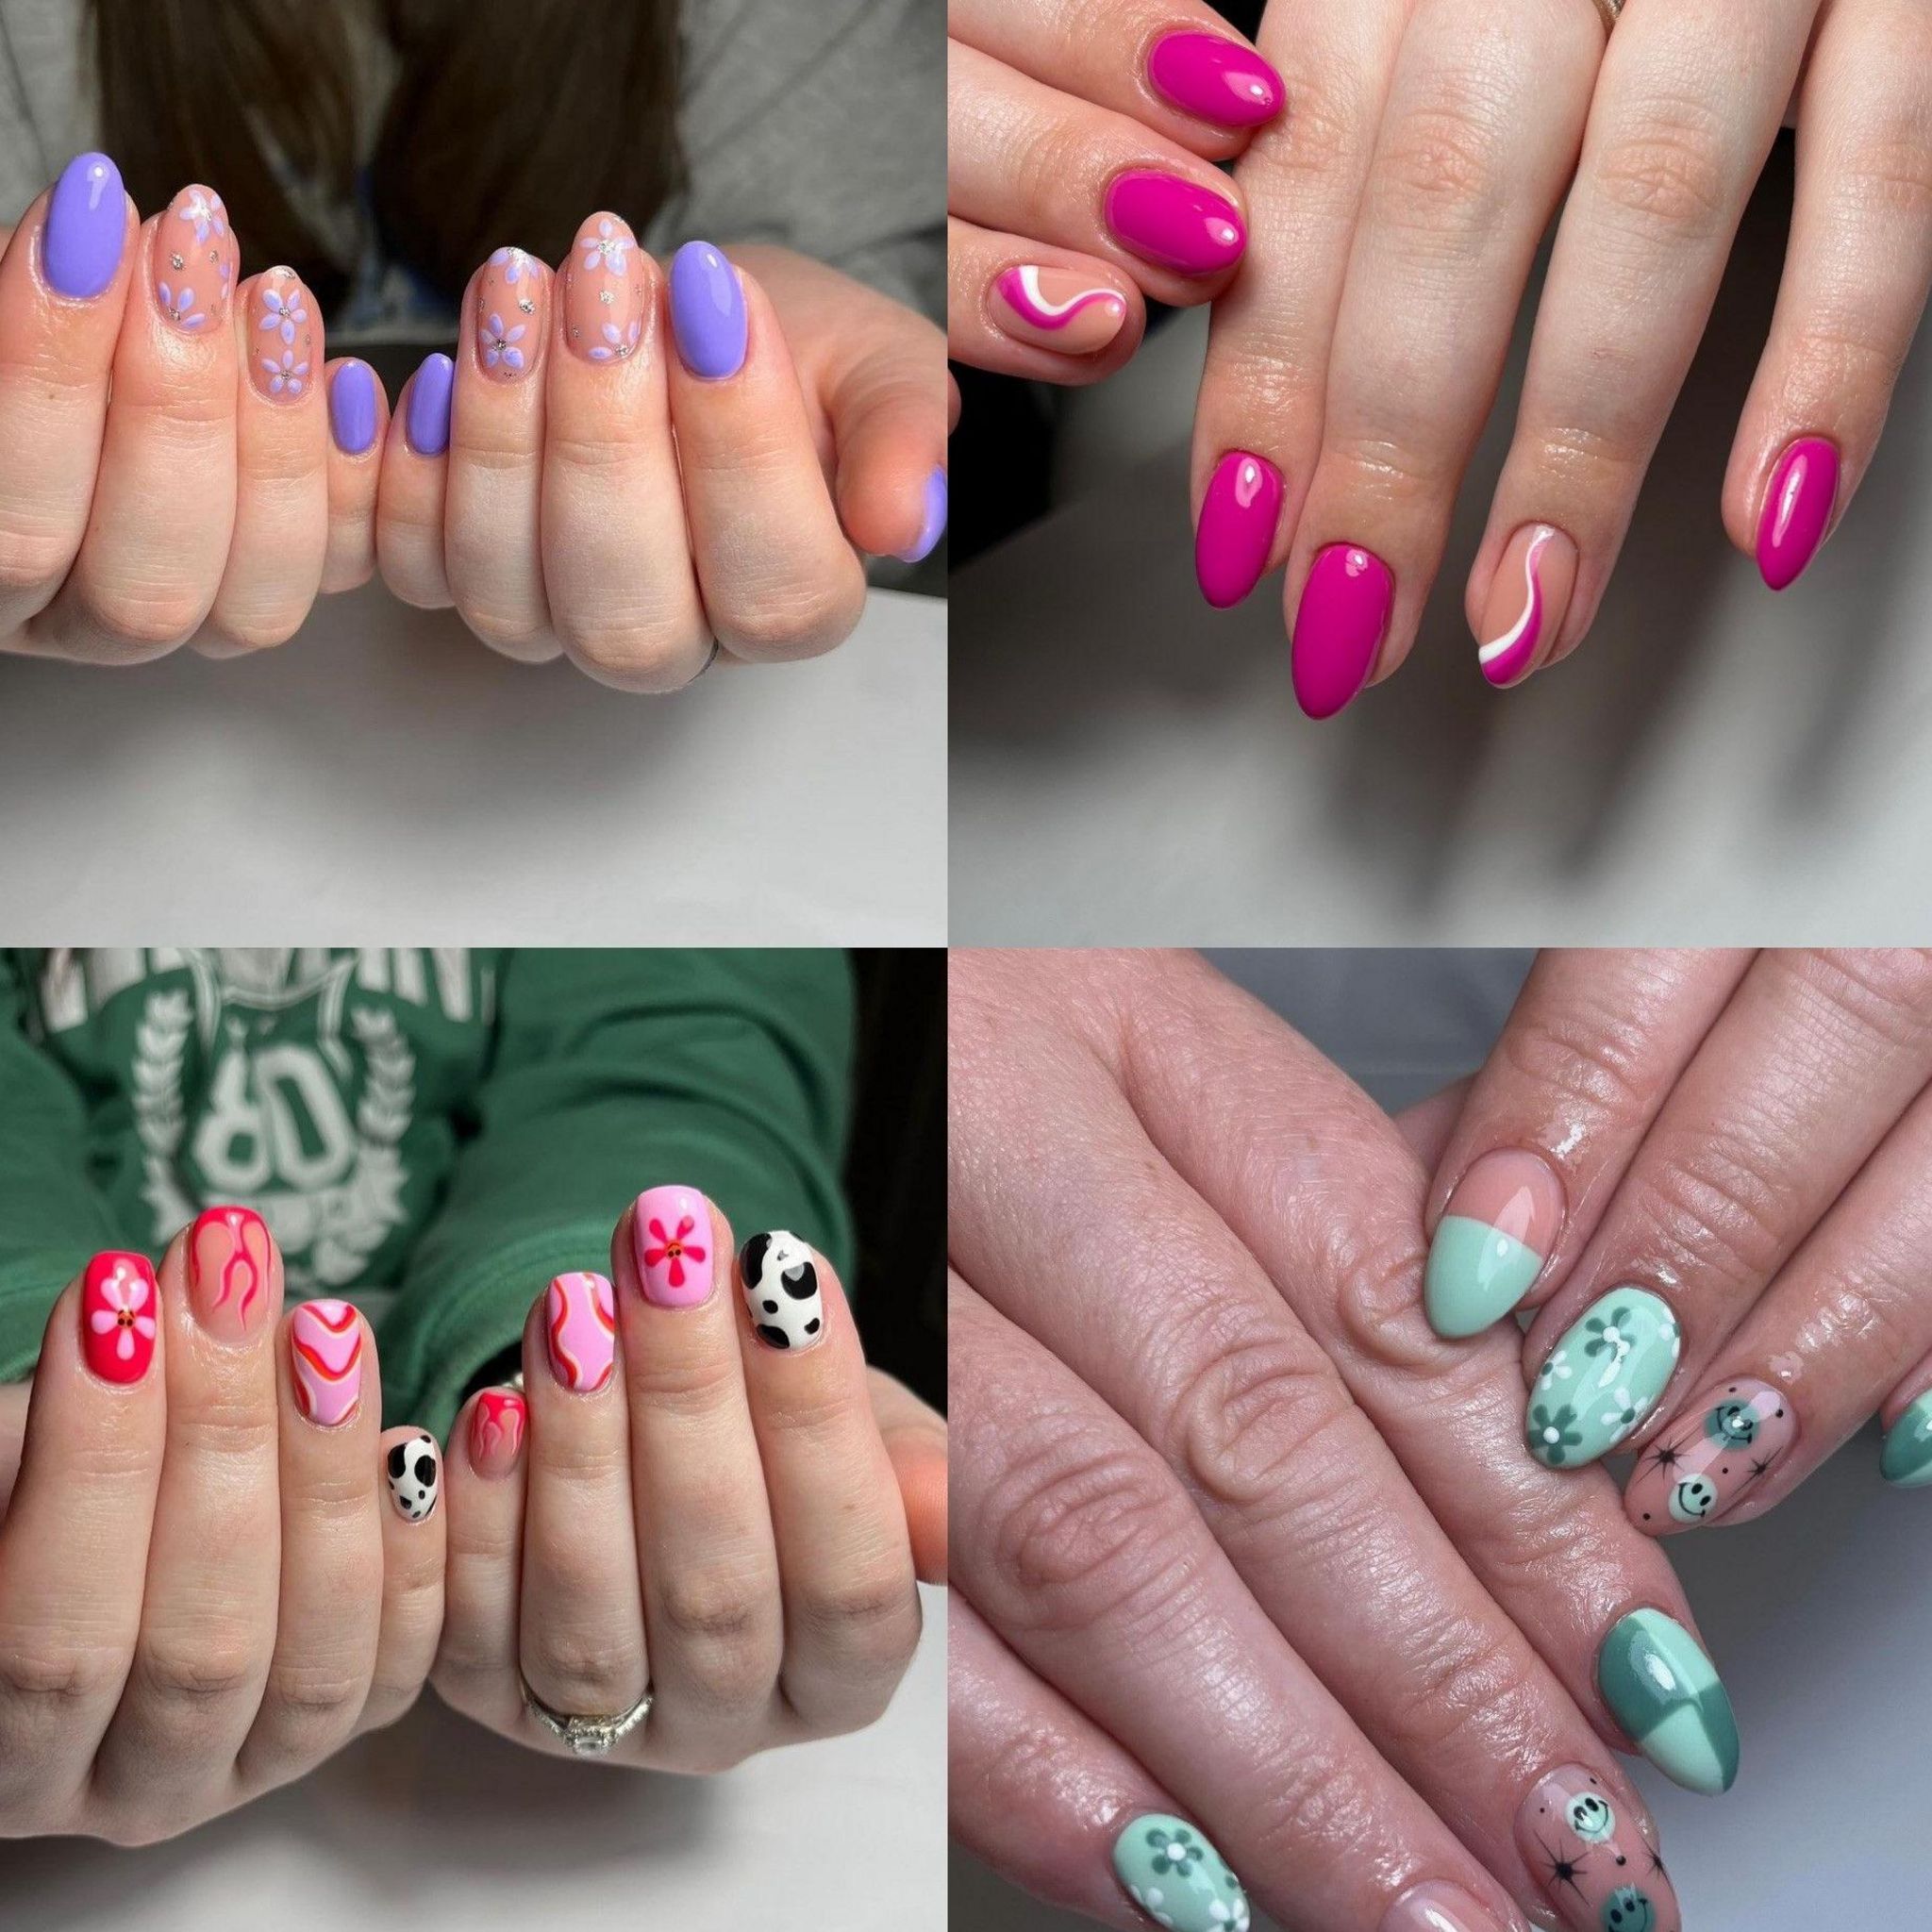 Pictures of nails with art by Ellie Jenkins 